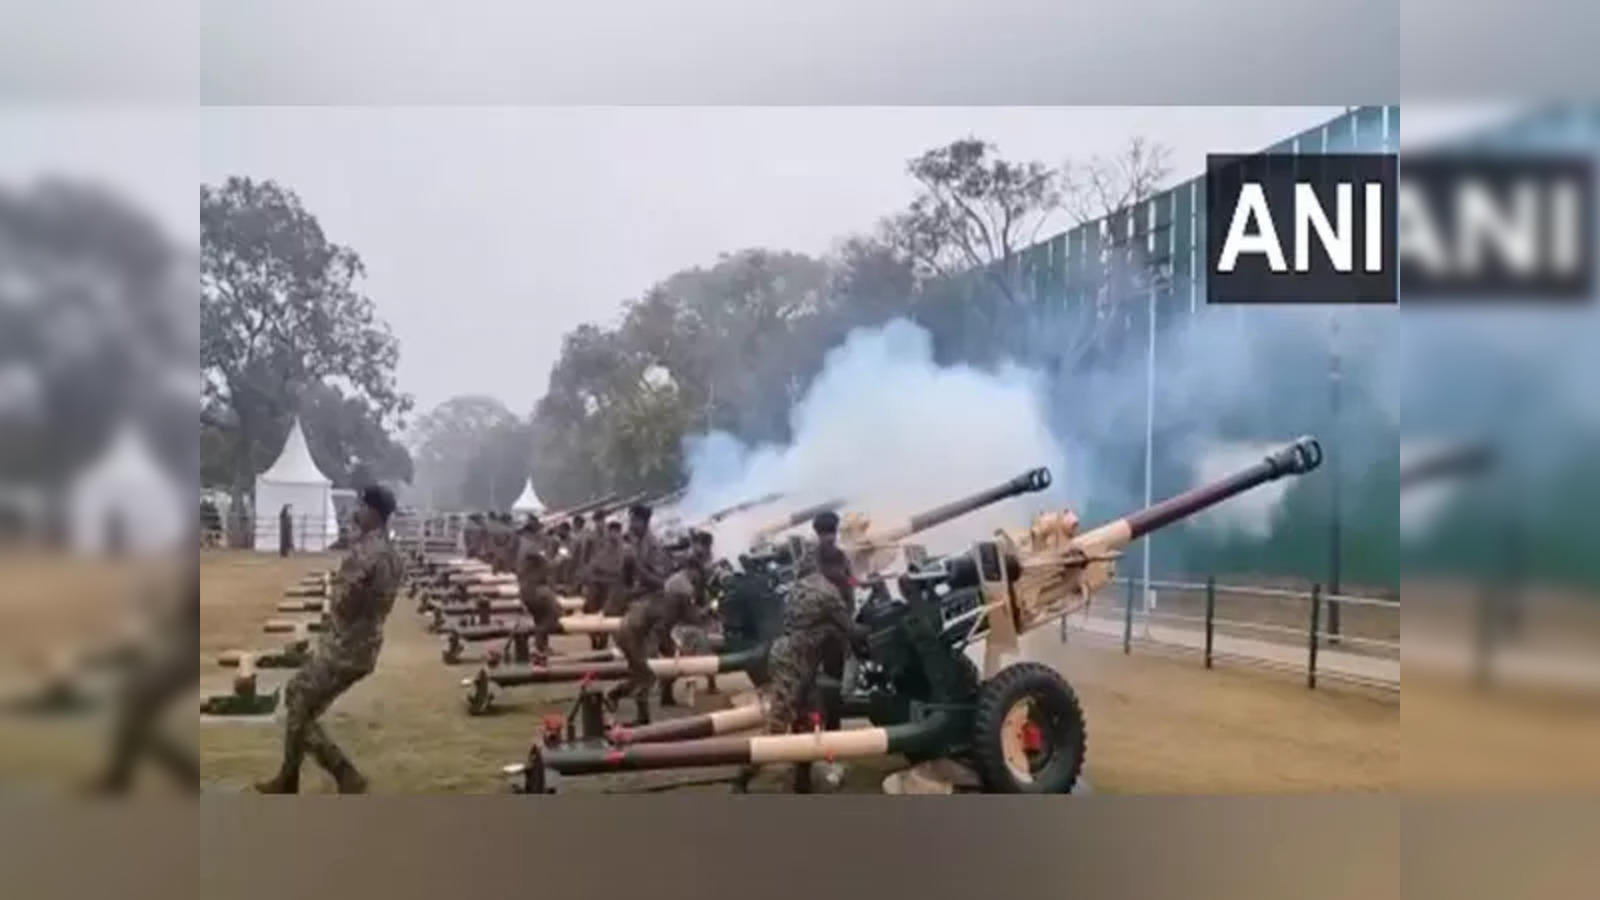 republic day 21 gun salute: Republic Day 21 Gun Salute: Are the